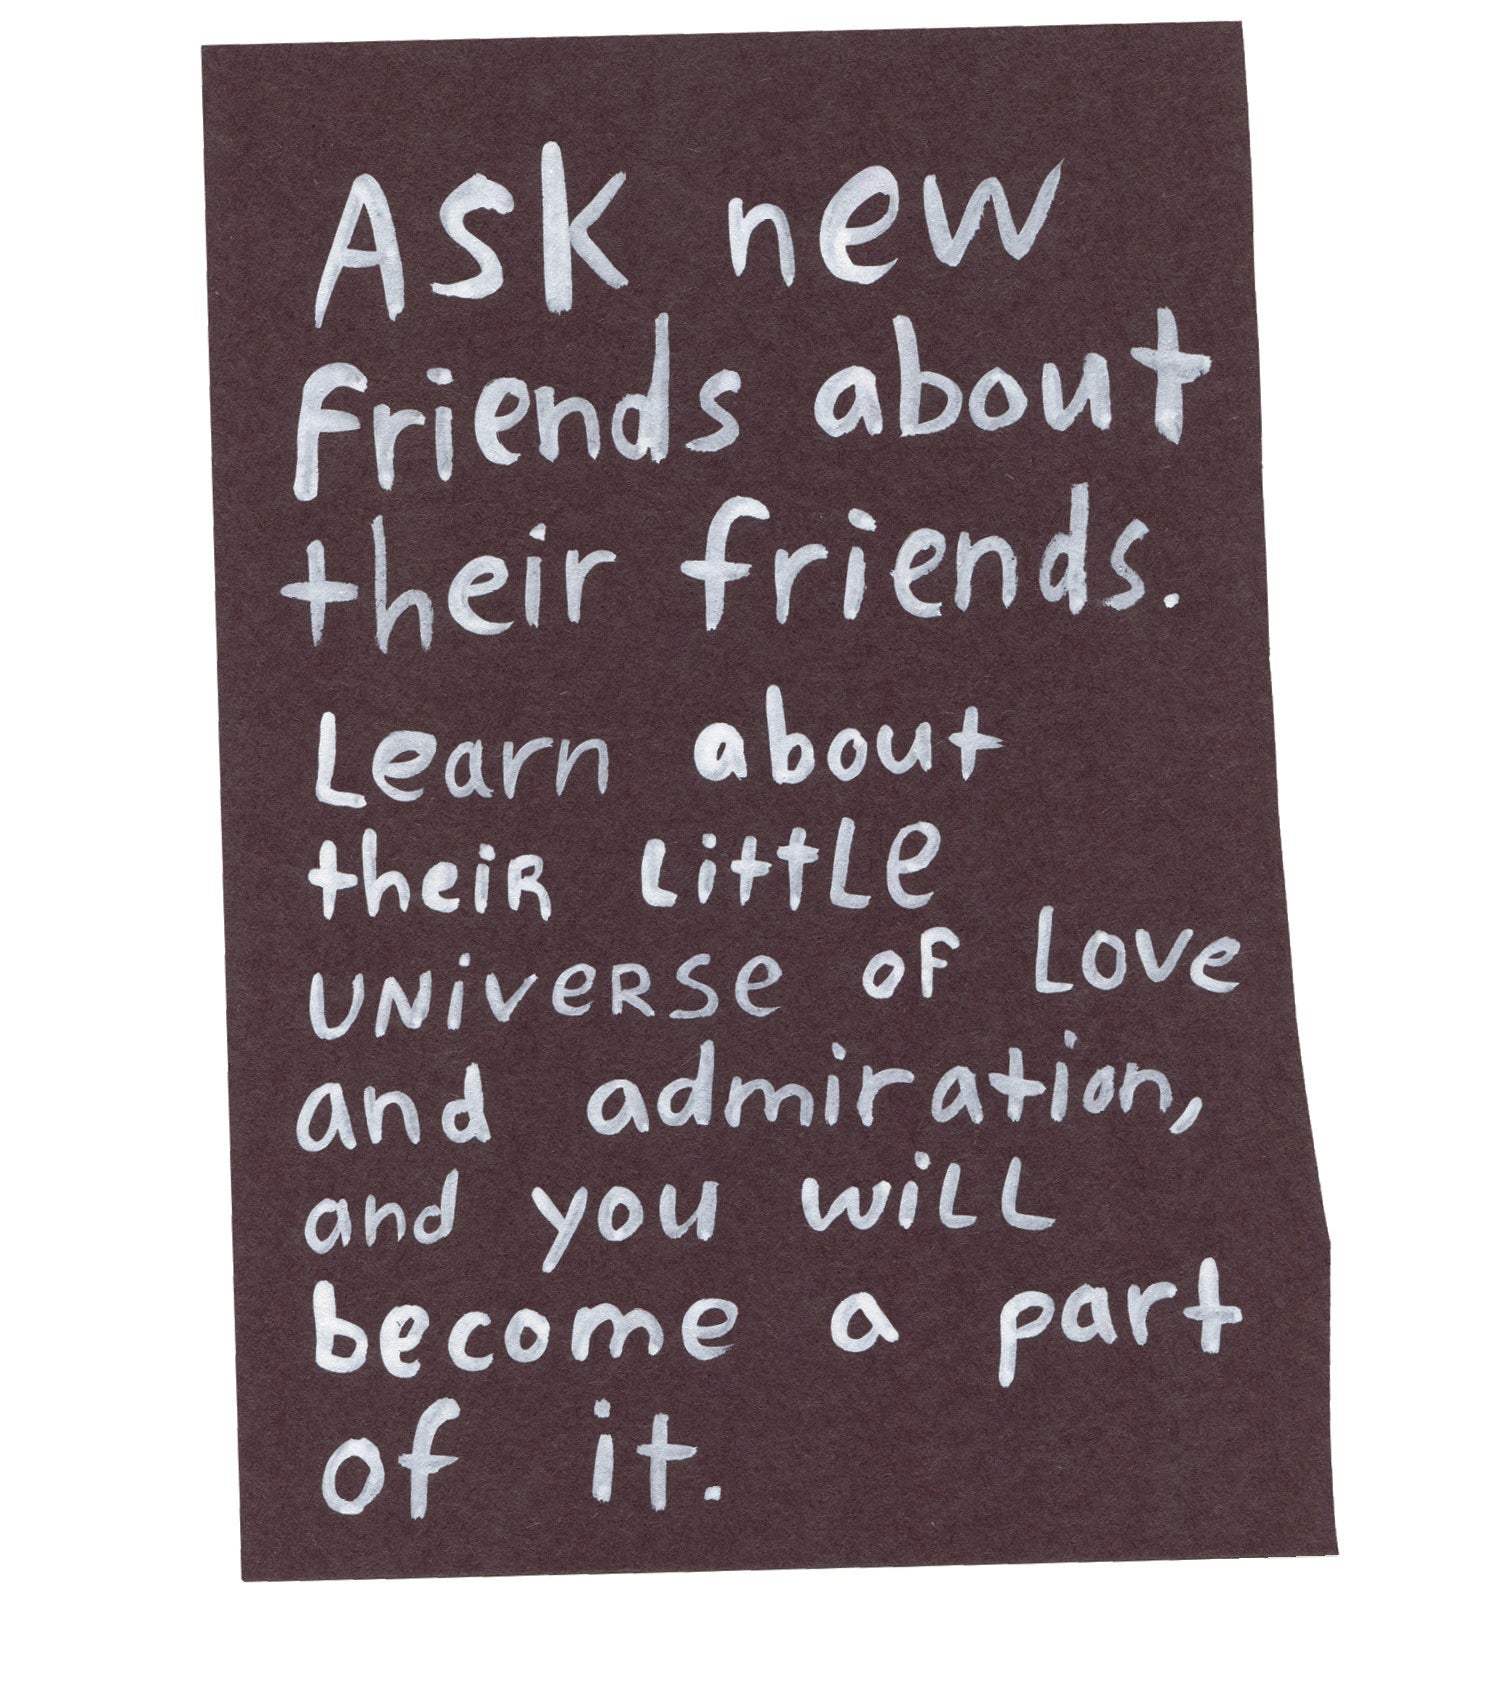 Handwritten text on torn piece of colored paper: &quot;Ask new friends about their friends. Learn about their little universe of love and admiration, and you will become a part of it.&quot;